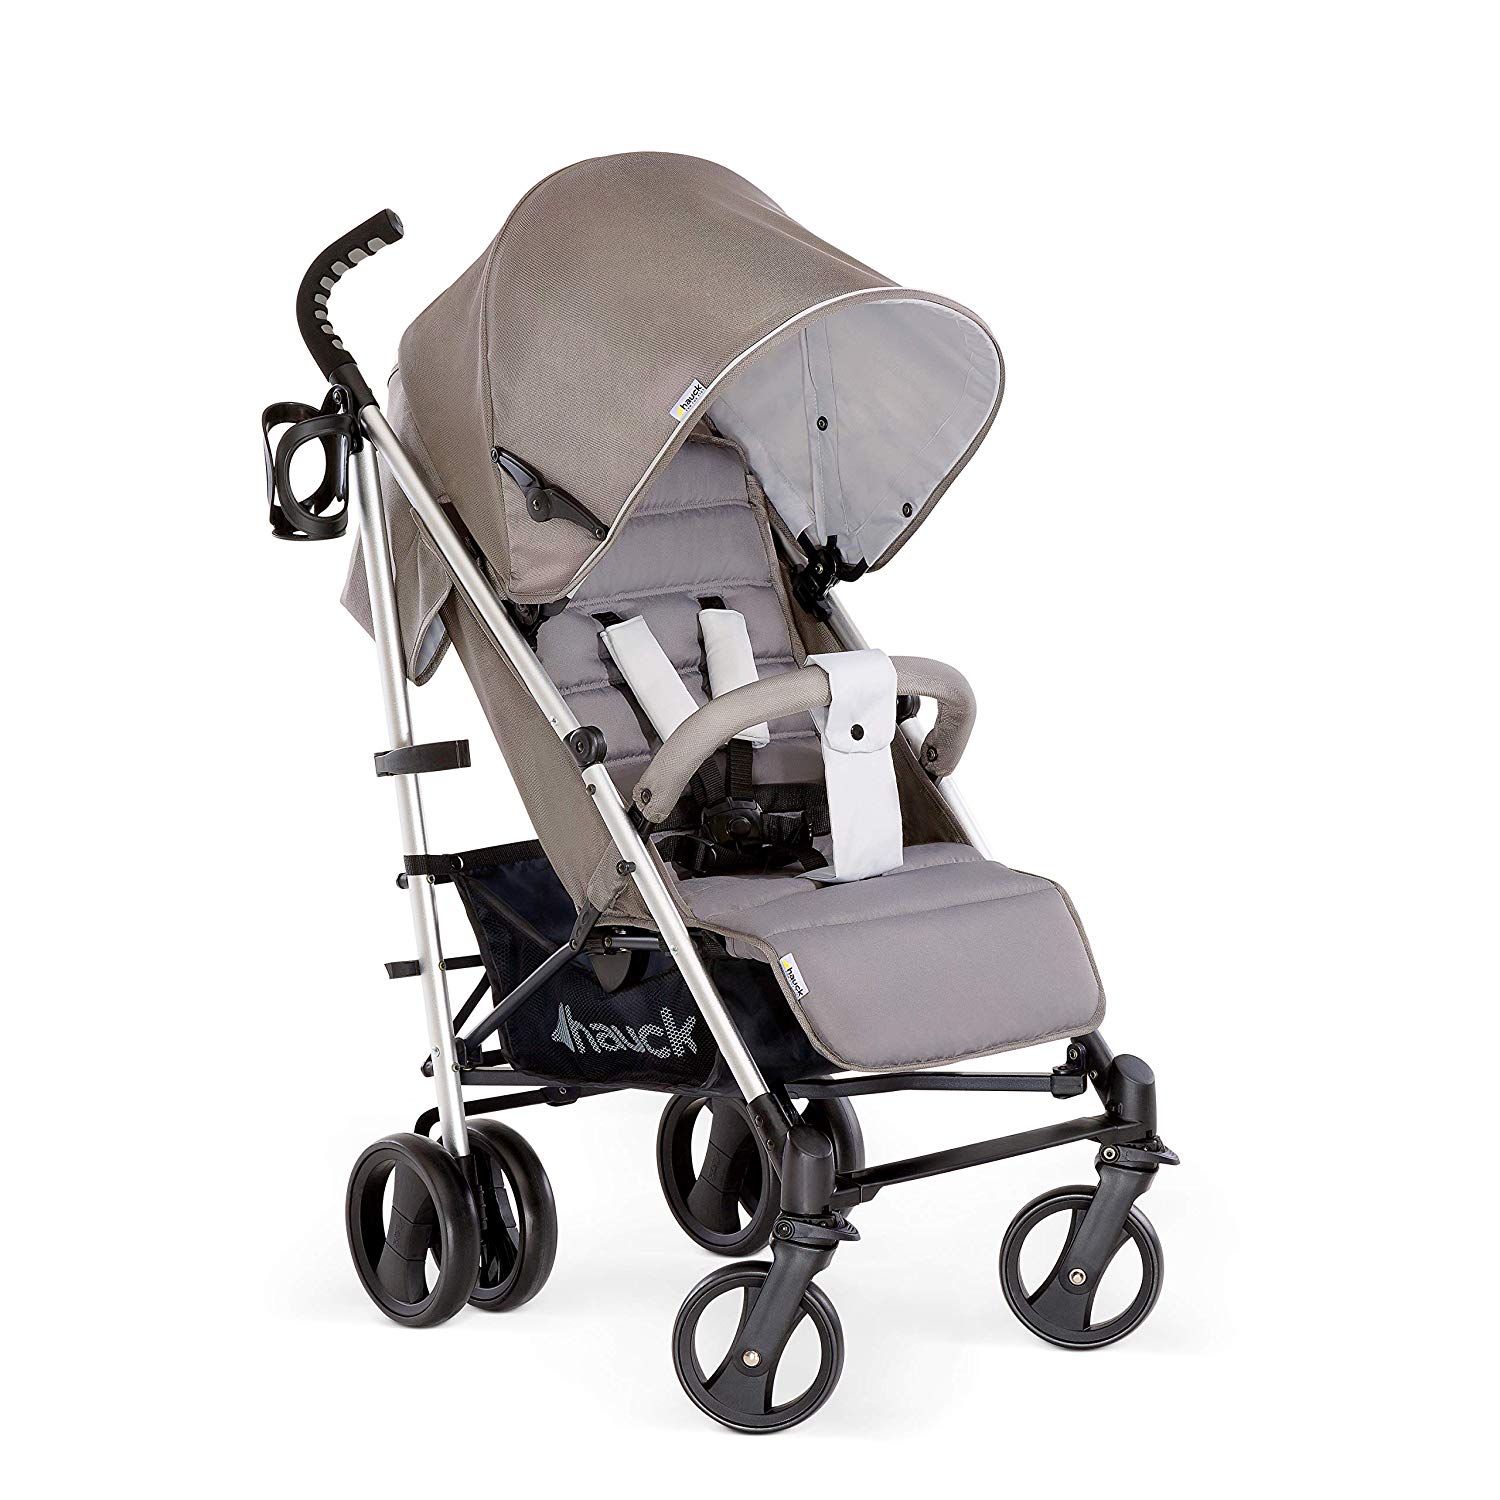 Hauck Hauck Vegas Lightweight Buggy up to 25 kg with Reclining Function from Birth Flat Folding Aluminium Drinks Holder Large Basket grey